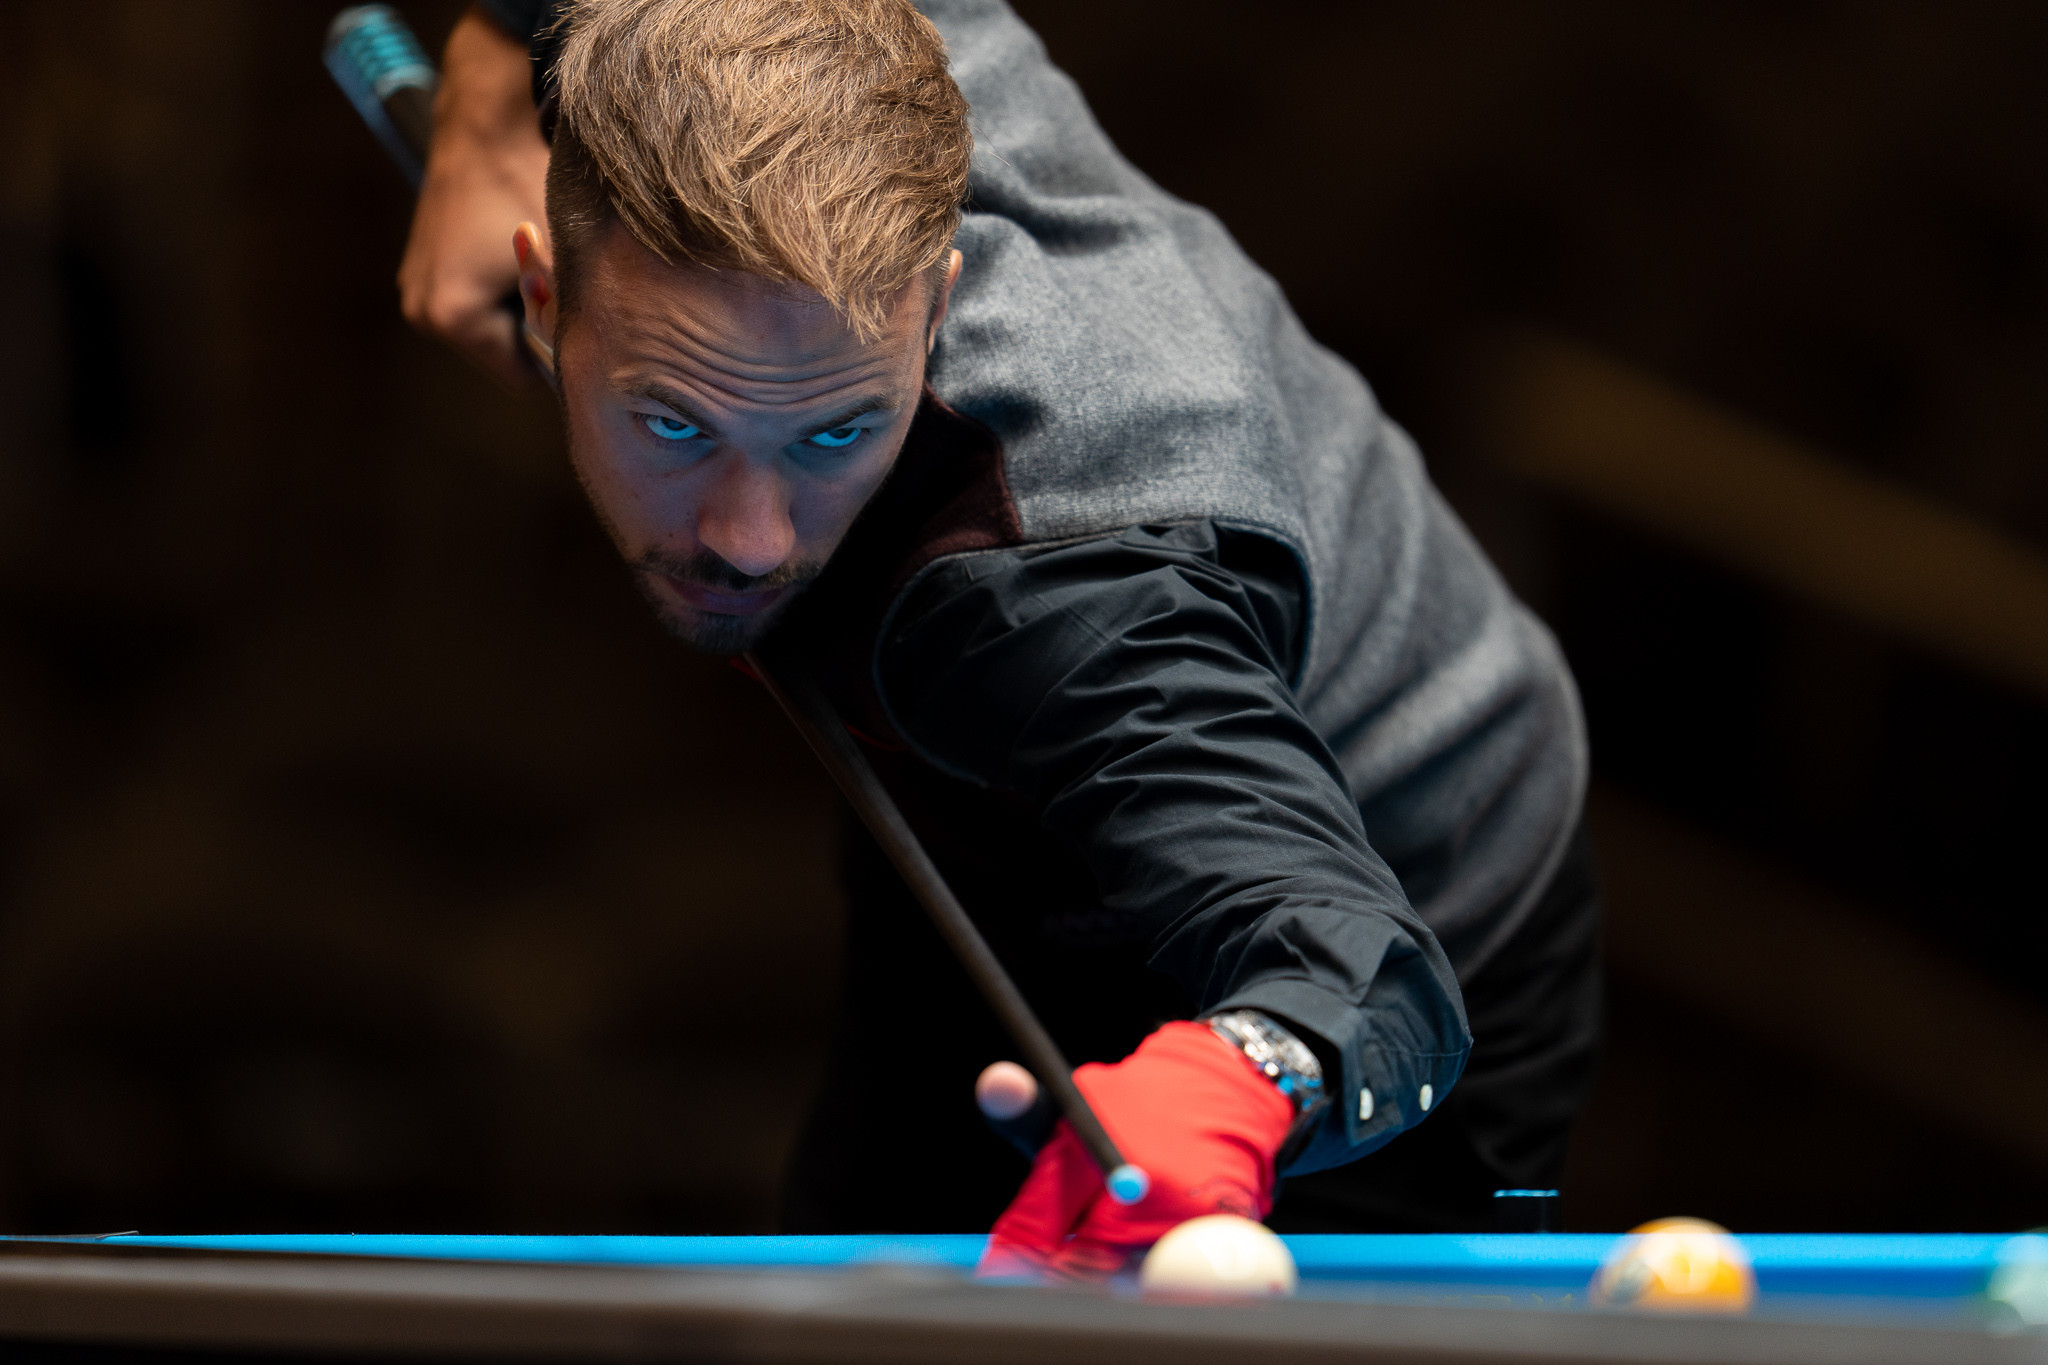 The men's pool tournament began today, with Austria's Albin Ouschan beating South Africa's Aden Carl Joseph 11-8 in the round of 16 ©Kyle Schwab/Dustin Massey Studios/The World Games 2022